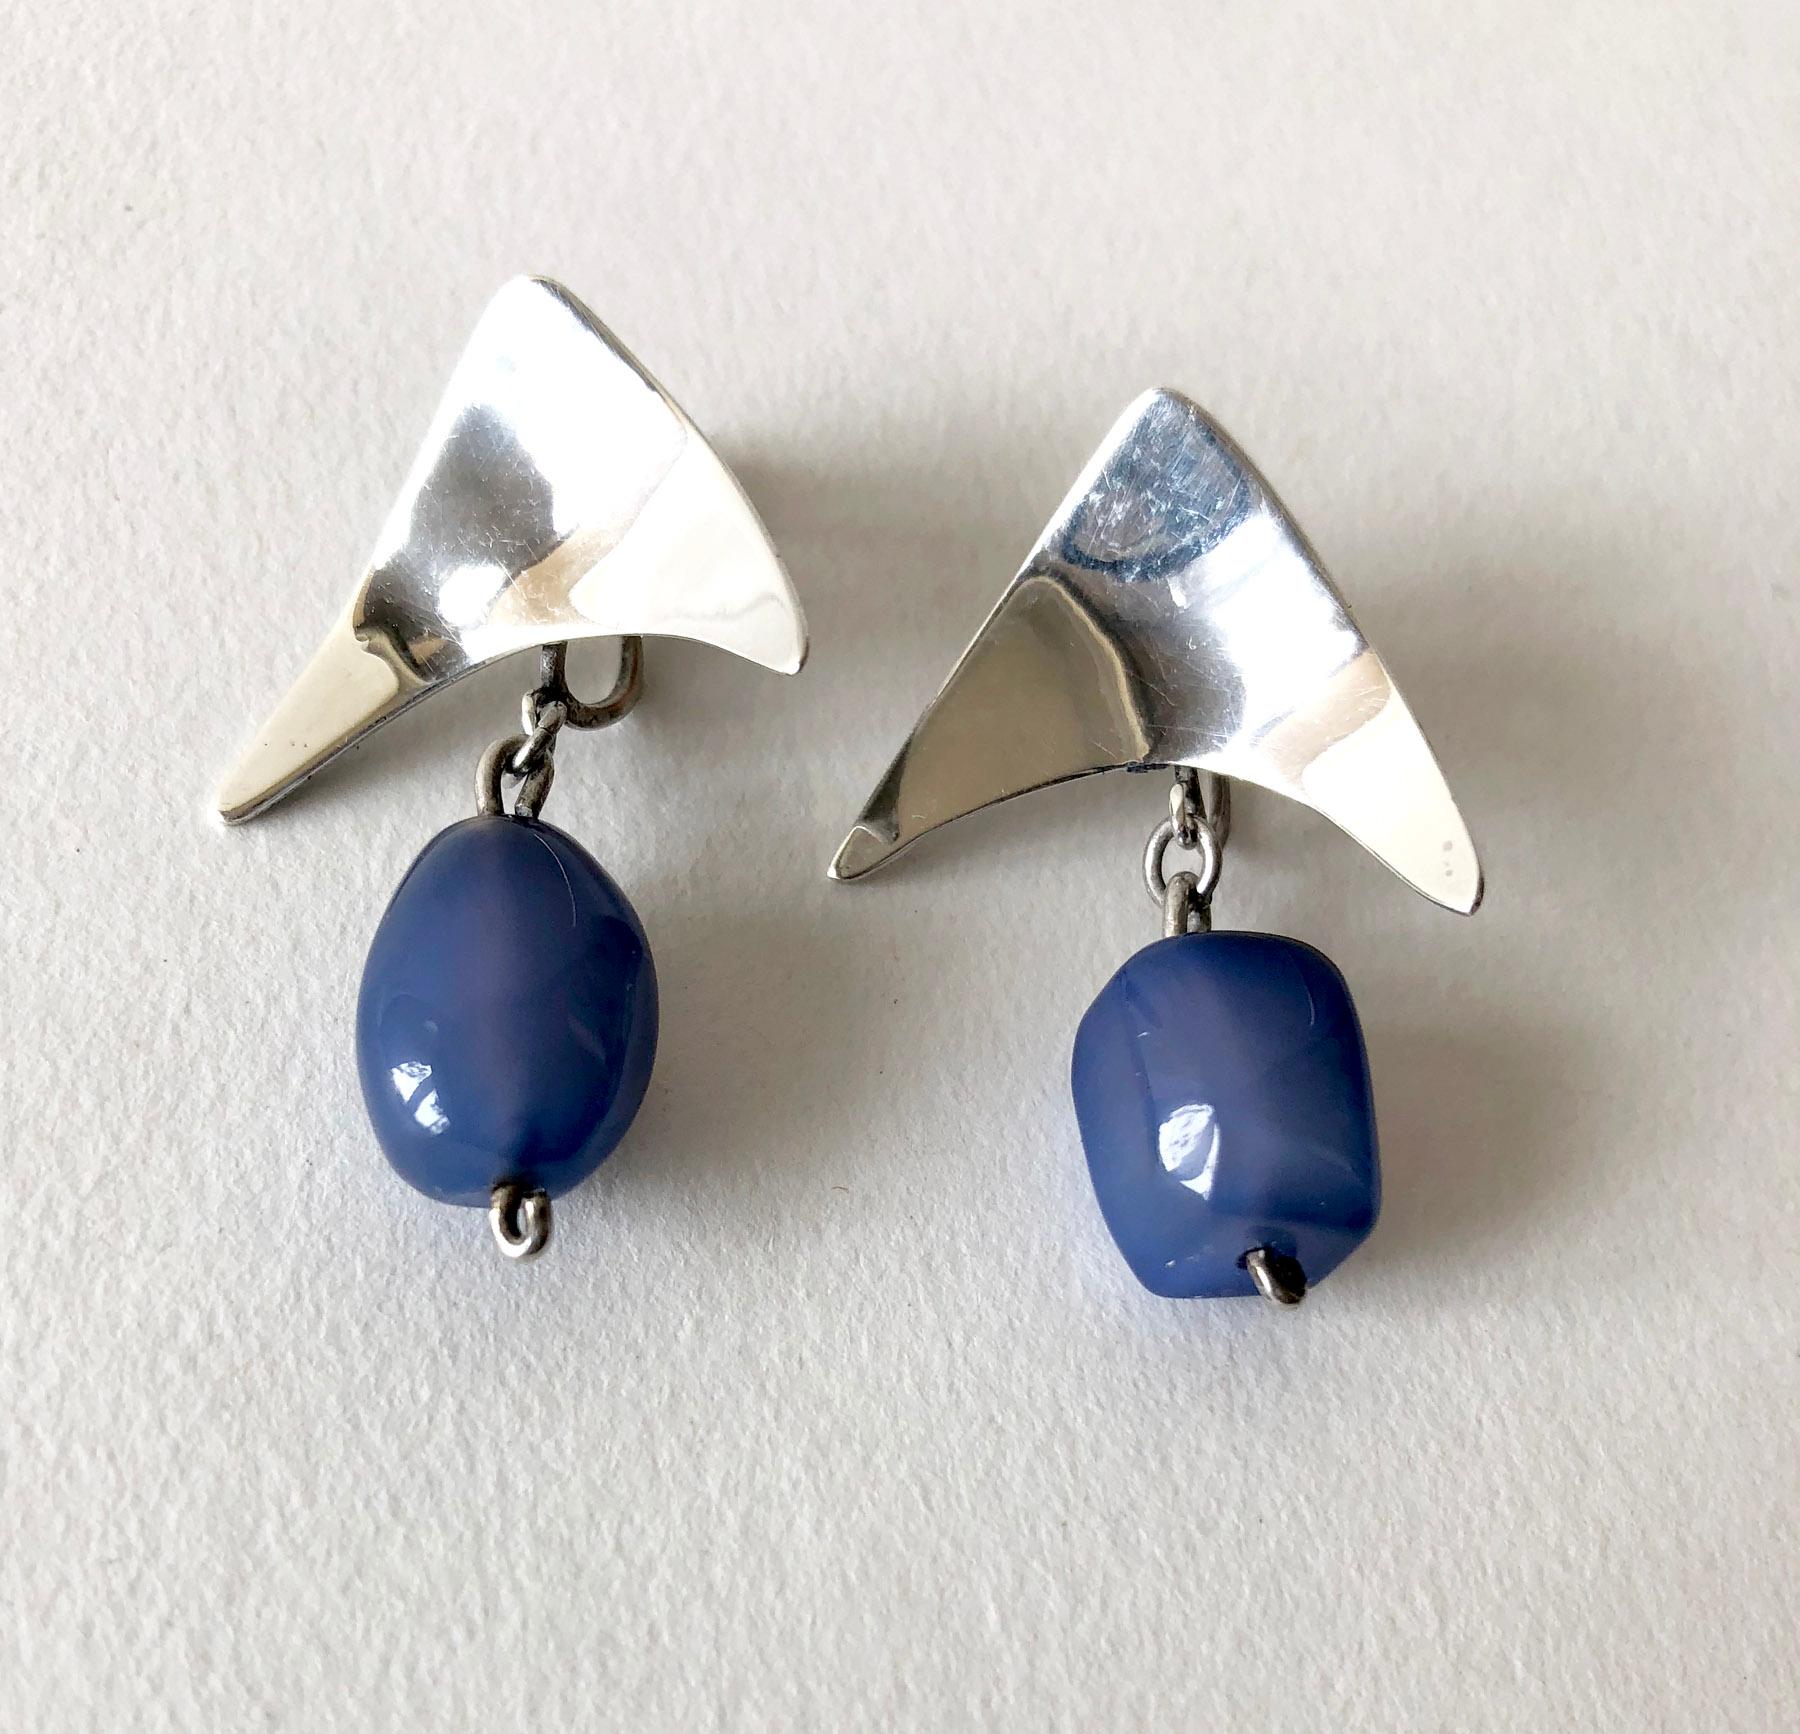 Rare, handmade sterling silver and blue agate quartz earrings created by Mildred Ball of South Carolina.  Earrings measure 1 1/2